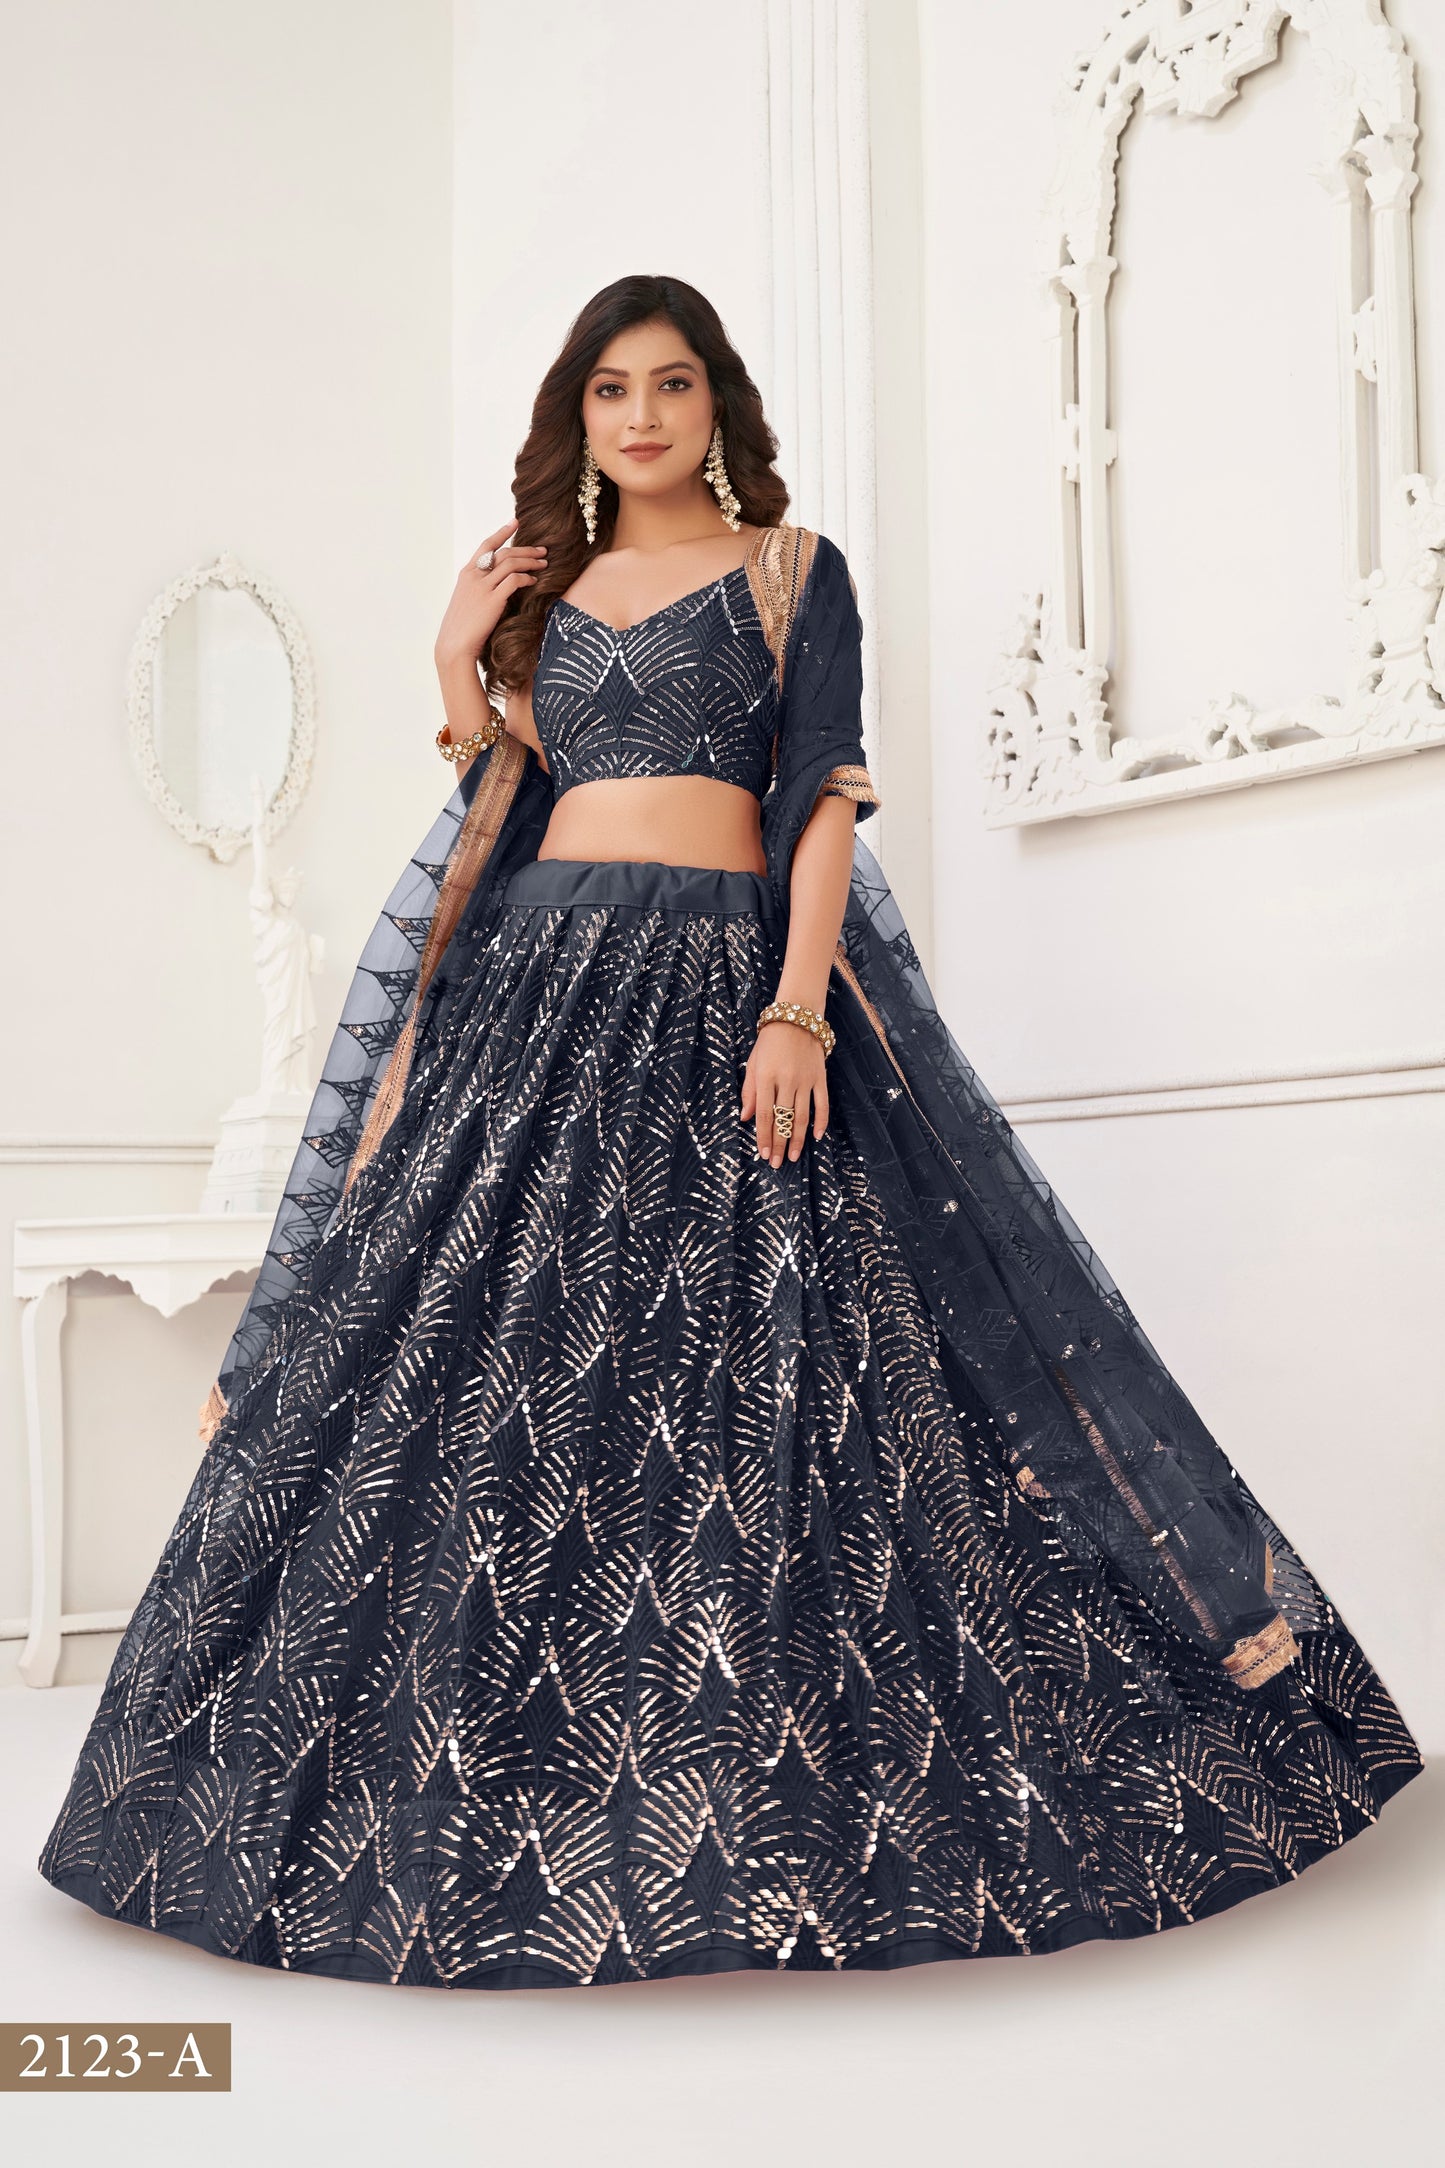 Charcoal Color Net Embroidered Lehenga Choli For Indian Festival & Weddings - Embroidery Work